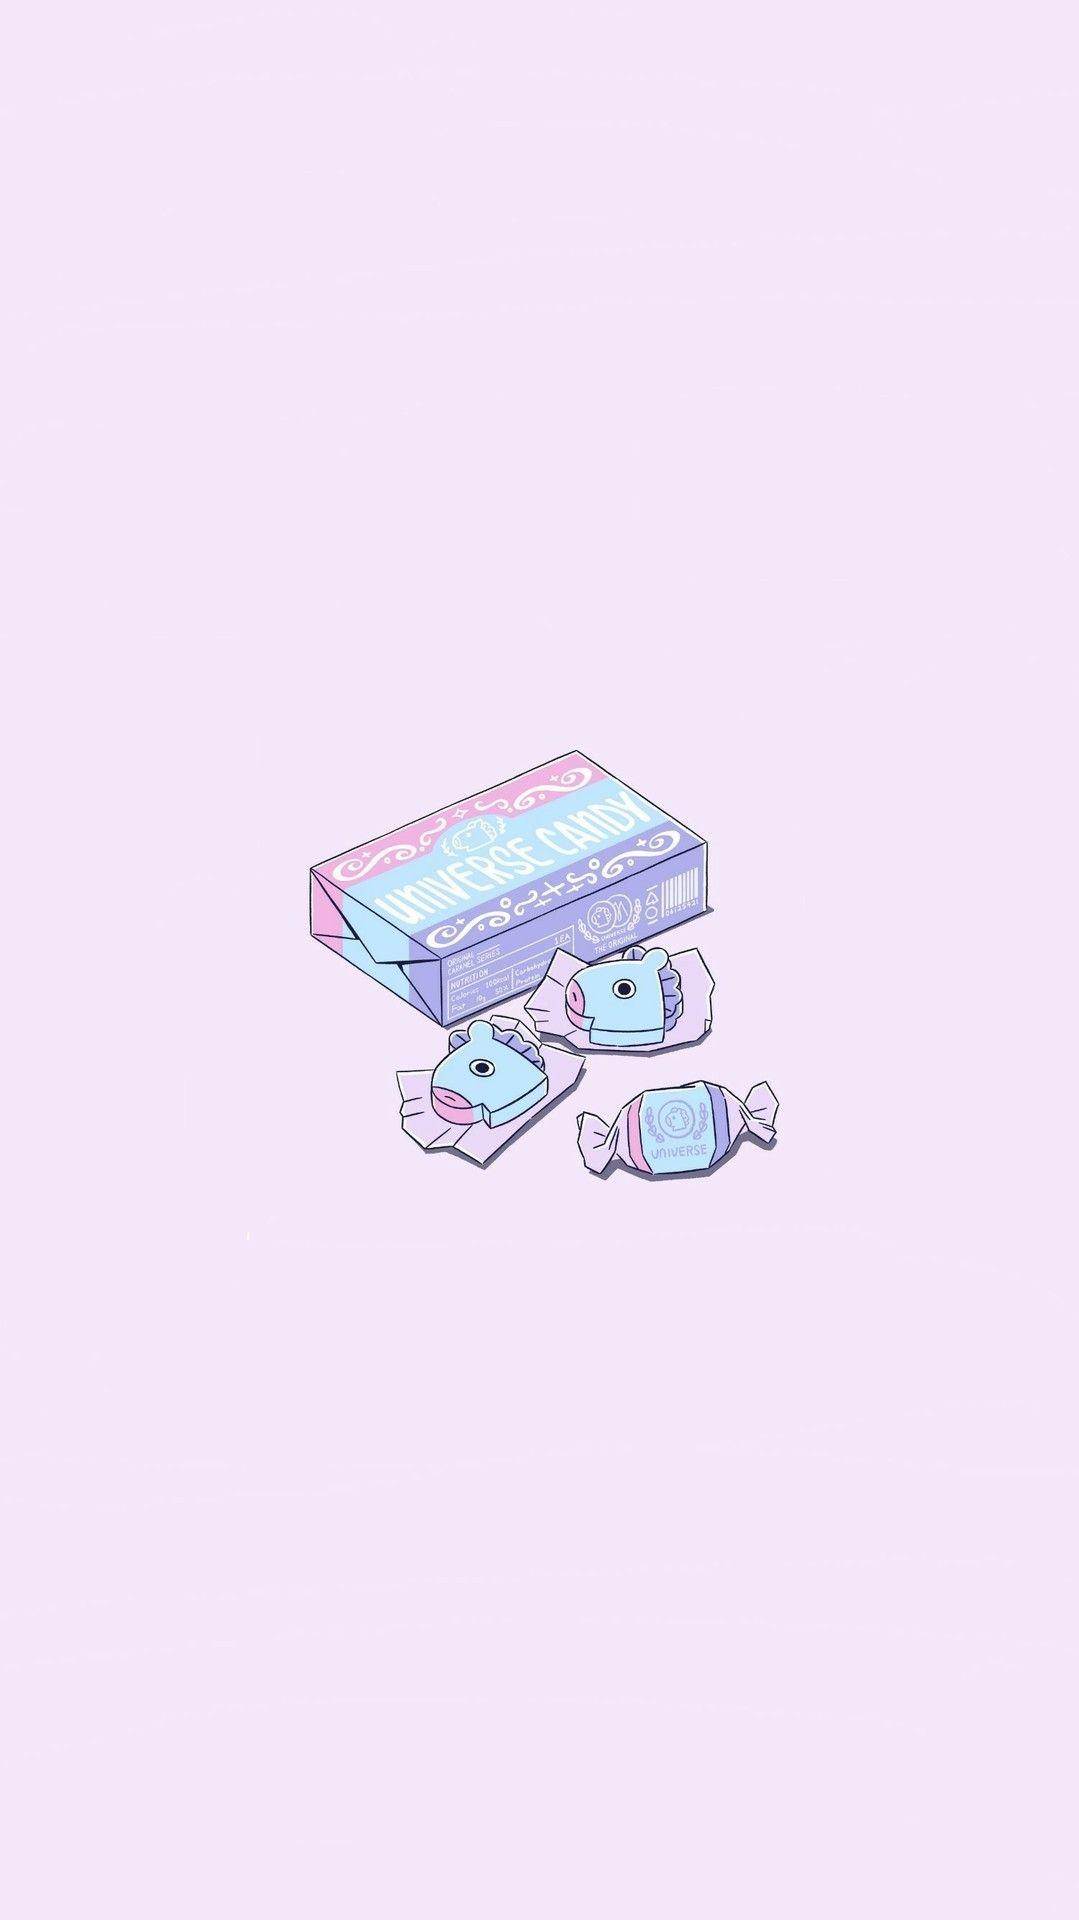 IPhone wallpaper of a purple box of sweeties with two sweets next to it - BT21